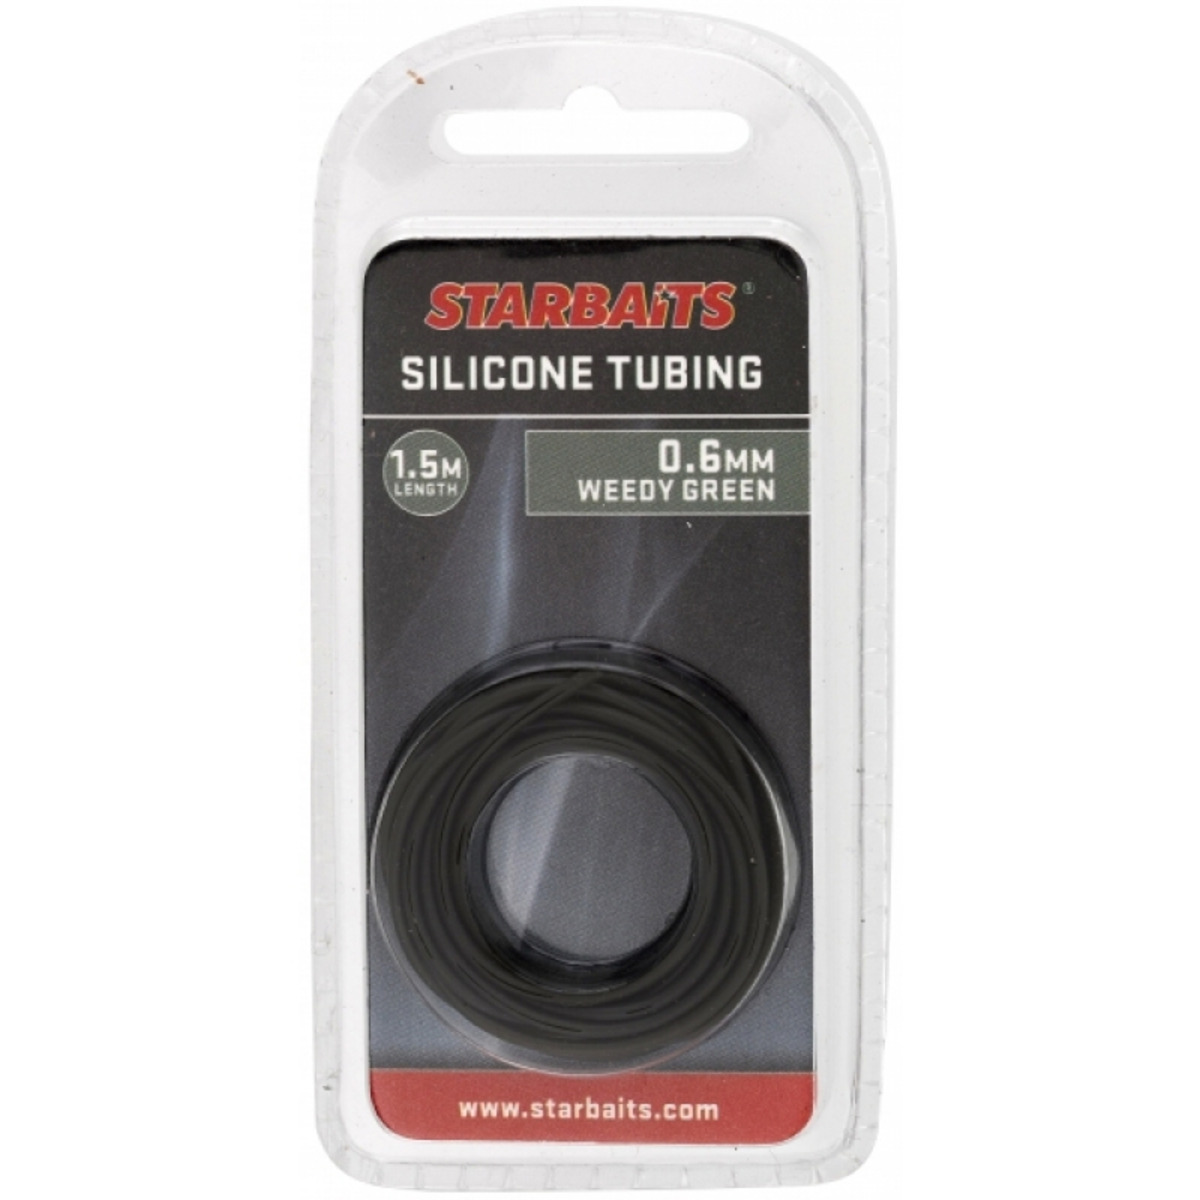 Starbaits Silicone Tubing 0.6mm - WEEDY GREEN